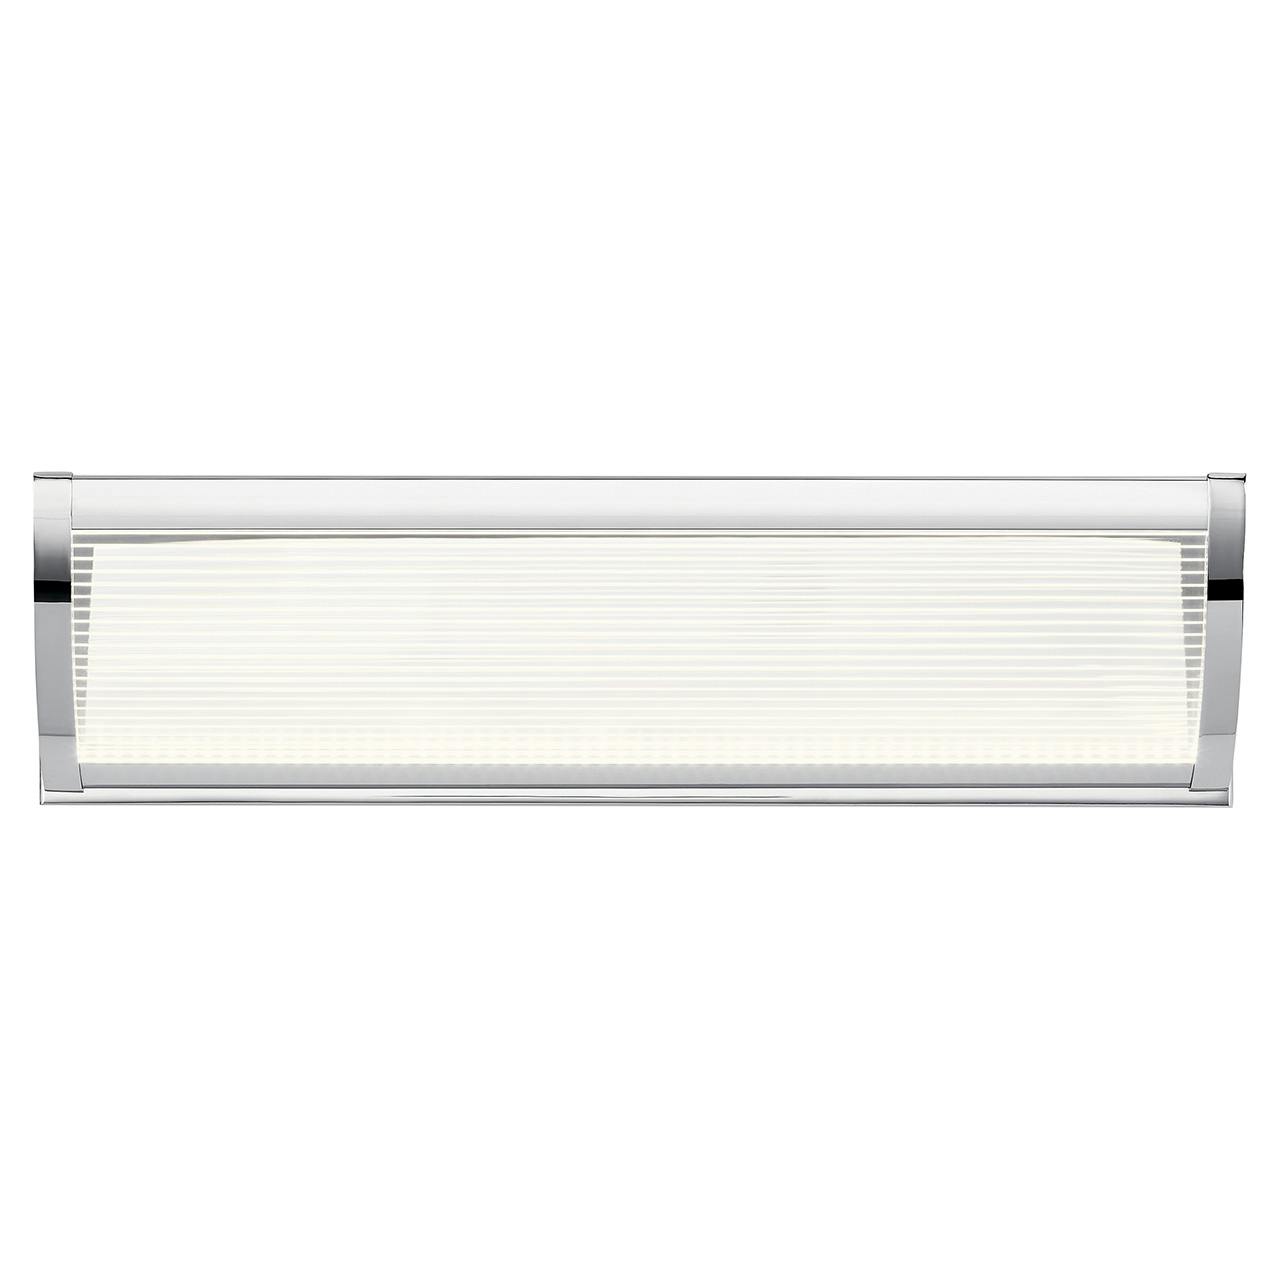 Front view of the Roone 3000K 19" Linear Bath Light Chrome on a white background